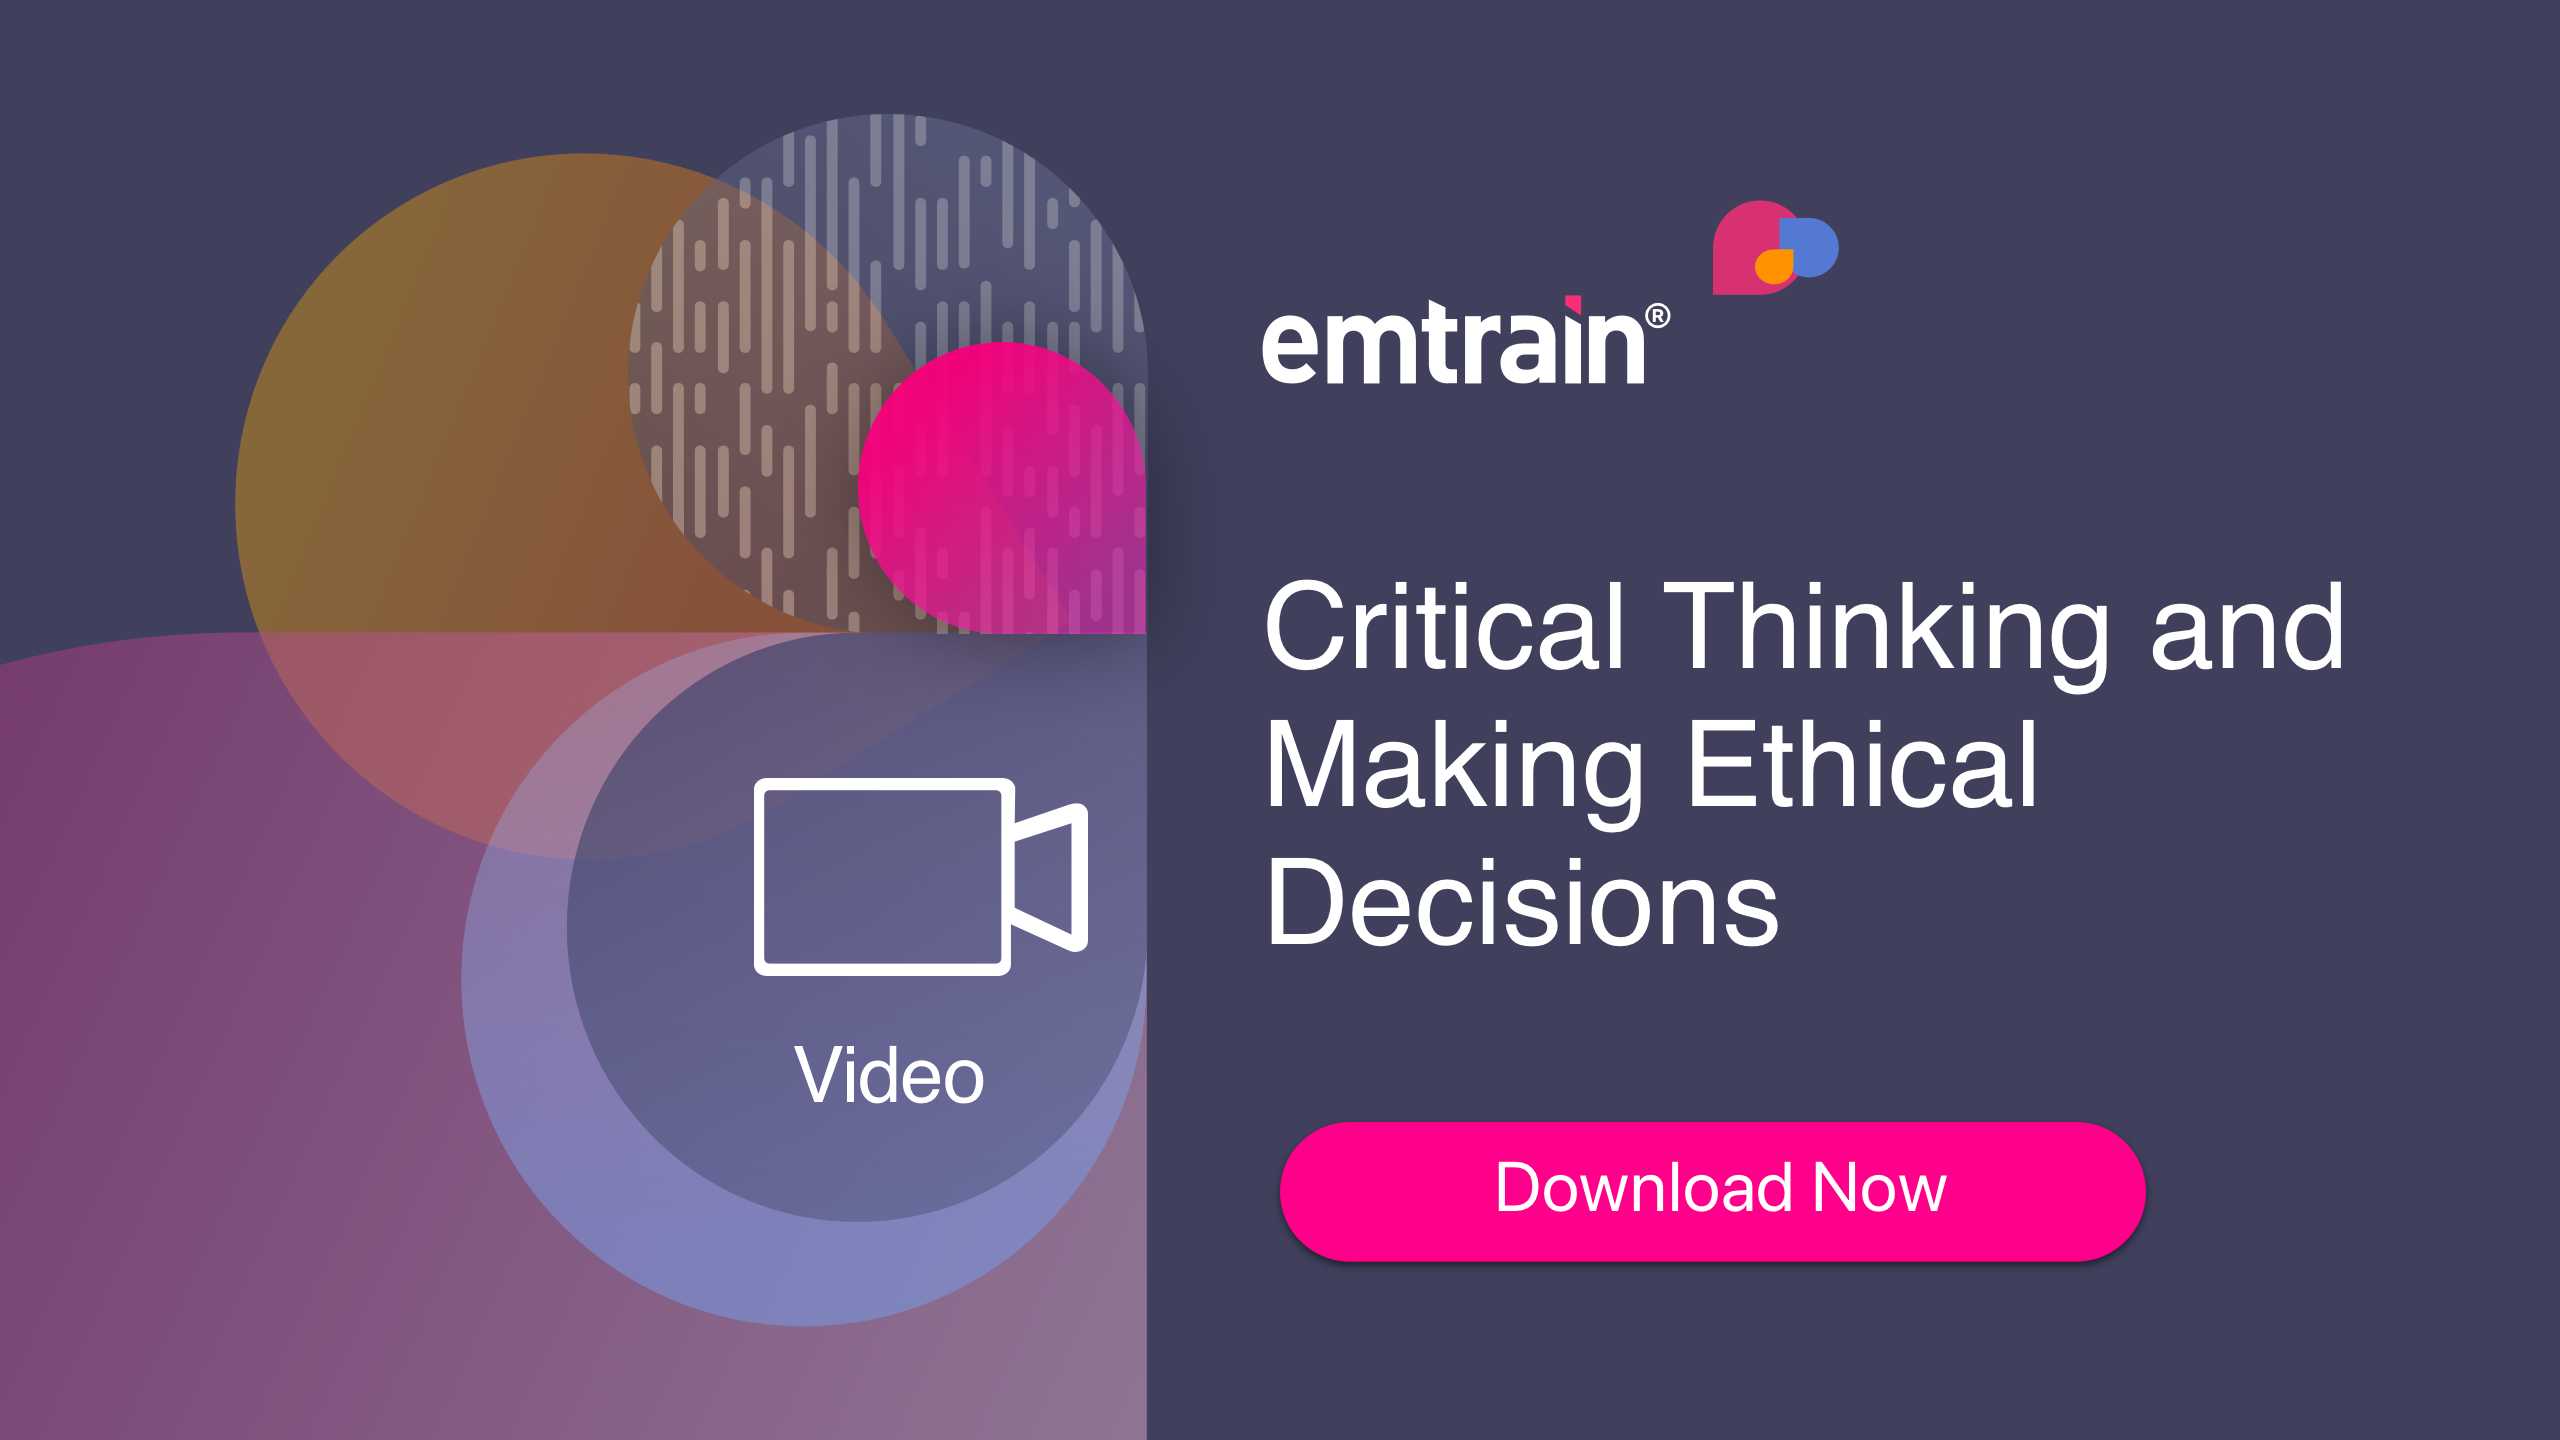 Critical Thinking and Making Ethical Decisions